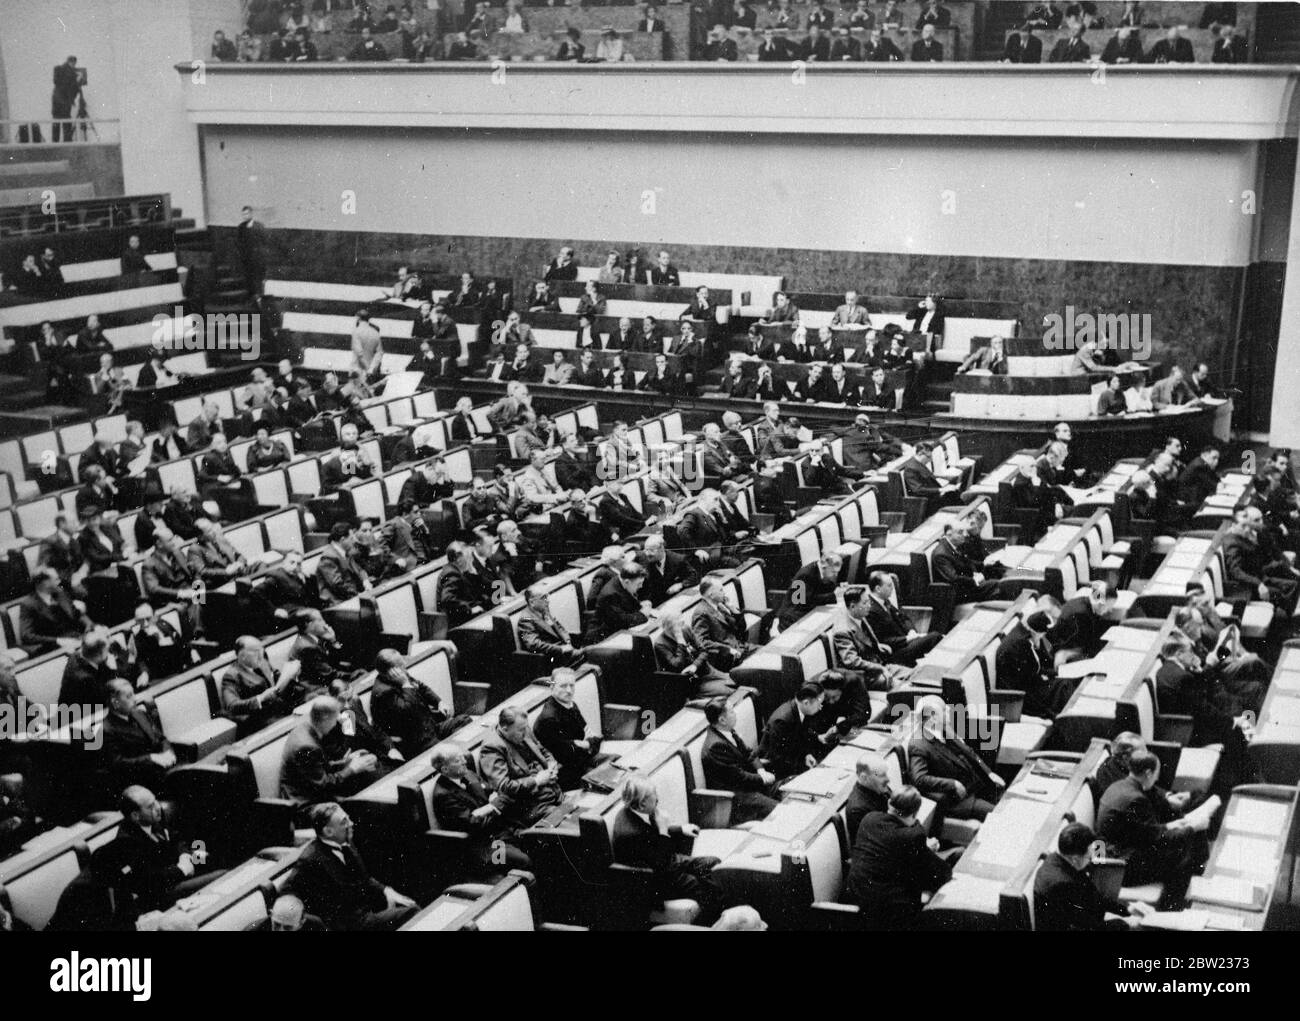 A view of the opening meeting at building. Under the presidency of the Aga Khan, the league of Nations assembly held its first meeting in the new league of Nations building at Geneva. There was no ceremony, but a resolution condemning the bombing of open Chinese towns and mask of non-combatants by Japan was supported by 52 nations. 29 September 1937. Stock Photo